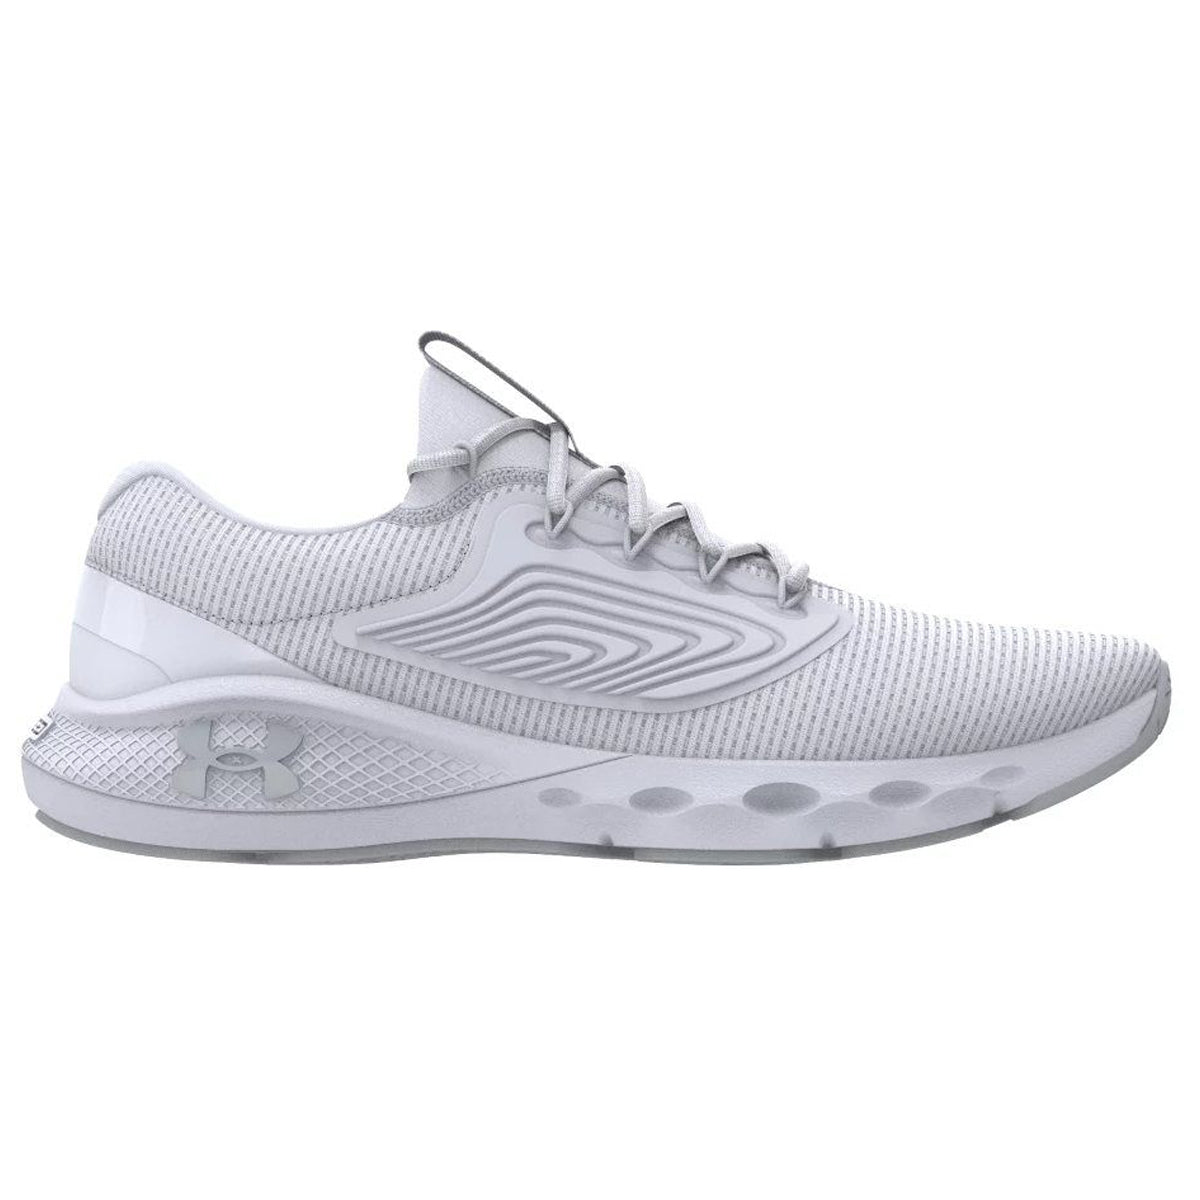 Shoes - Under Armour Women's Charged Vantage 2 Running Shoes